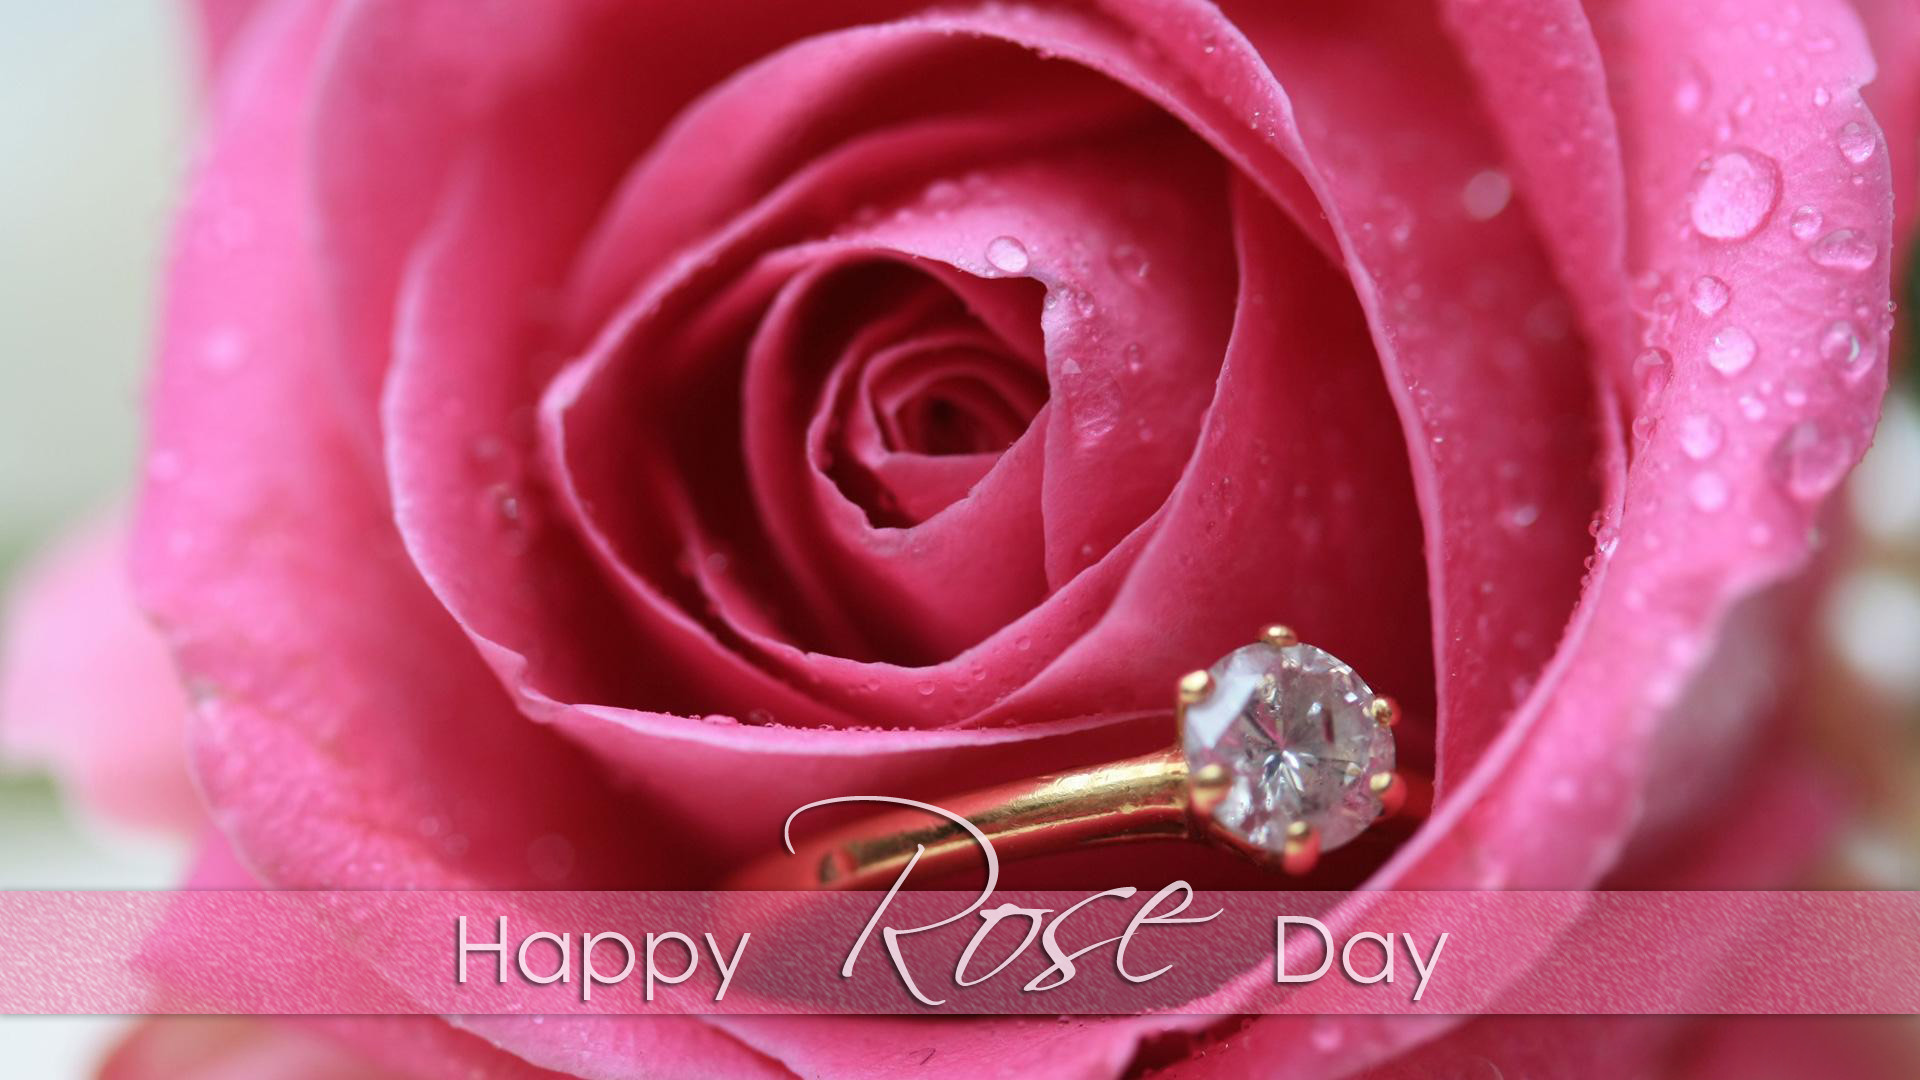 1920x1080 Download – Rose Day Images for Whatsapp DP Profile